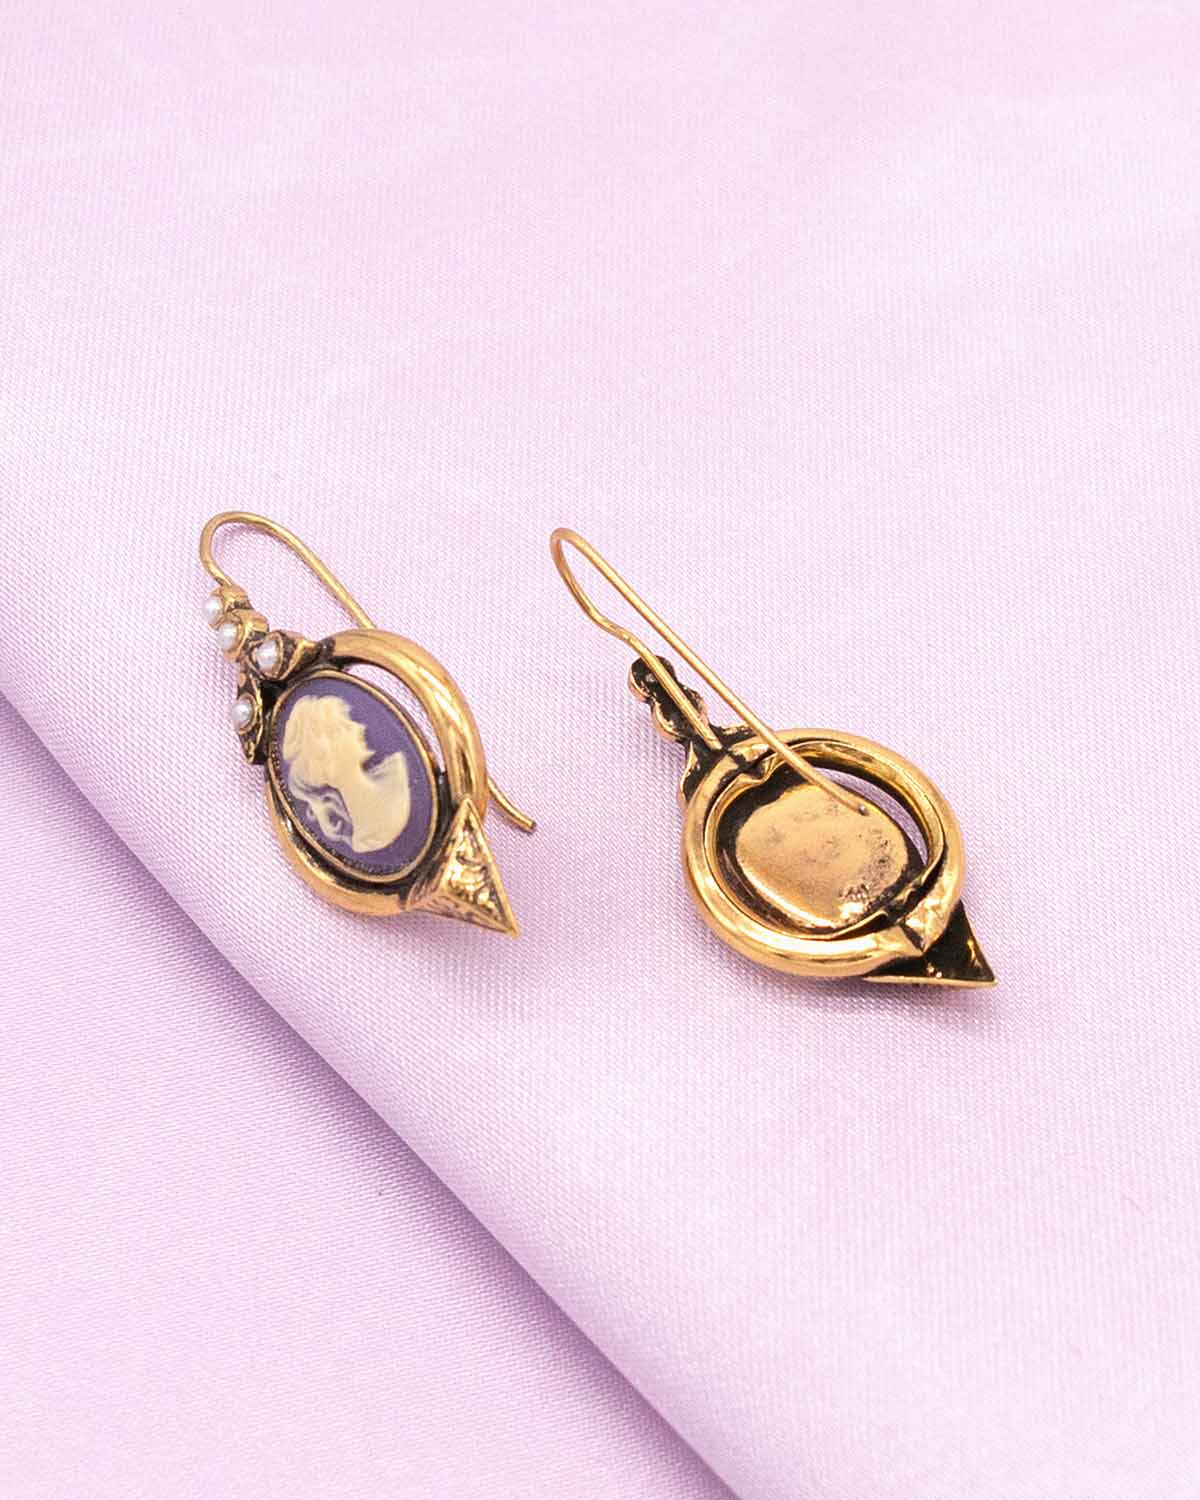 The Pienza Earrings (Tuscan Glimmer Edition)